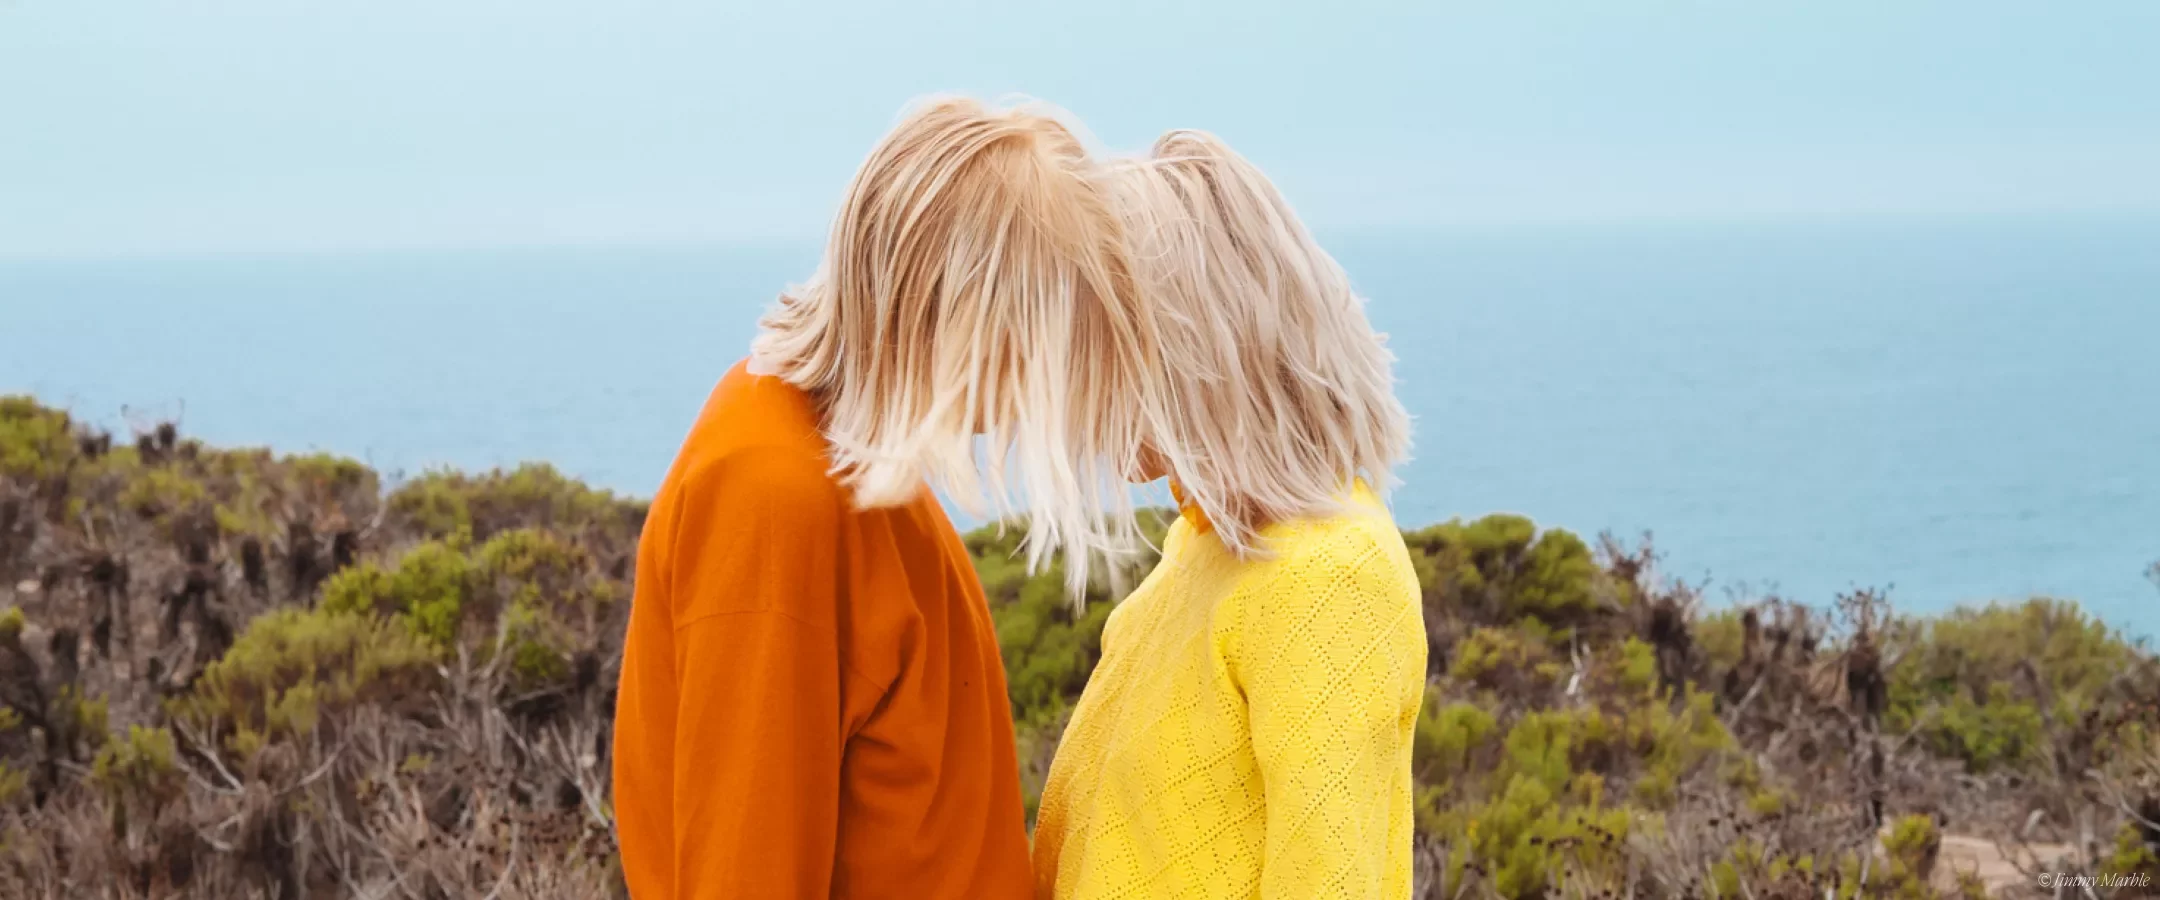 Let's stick together (c) Jimmy Marble